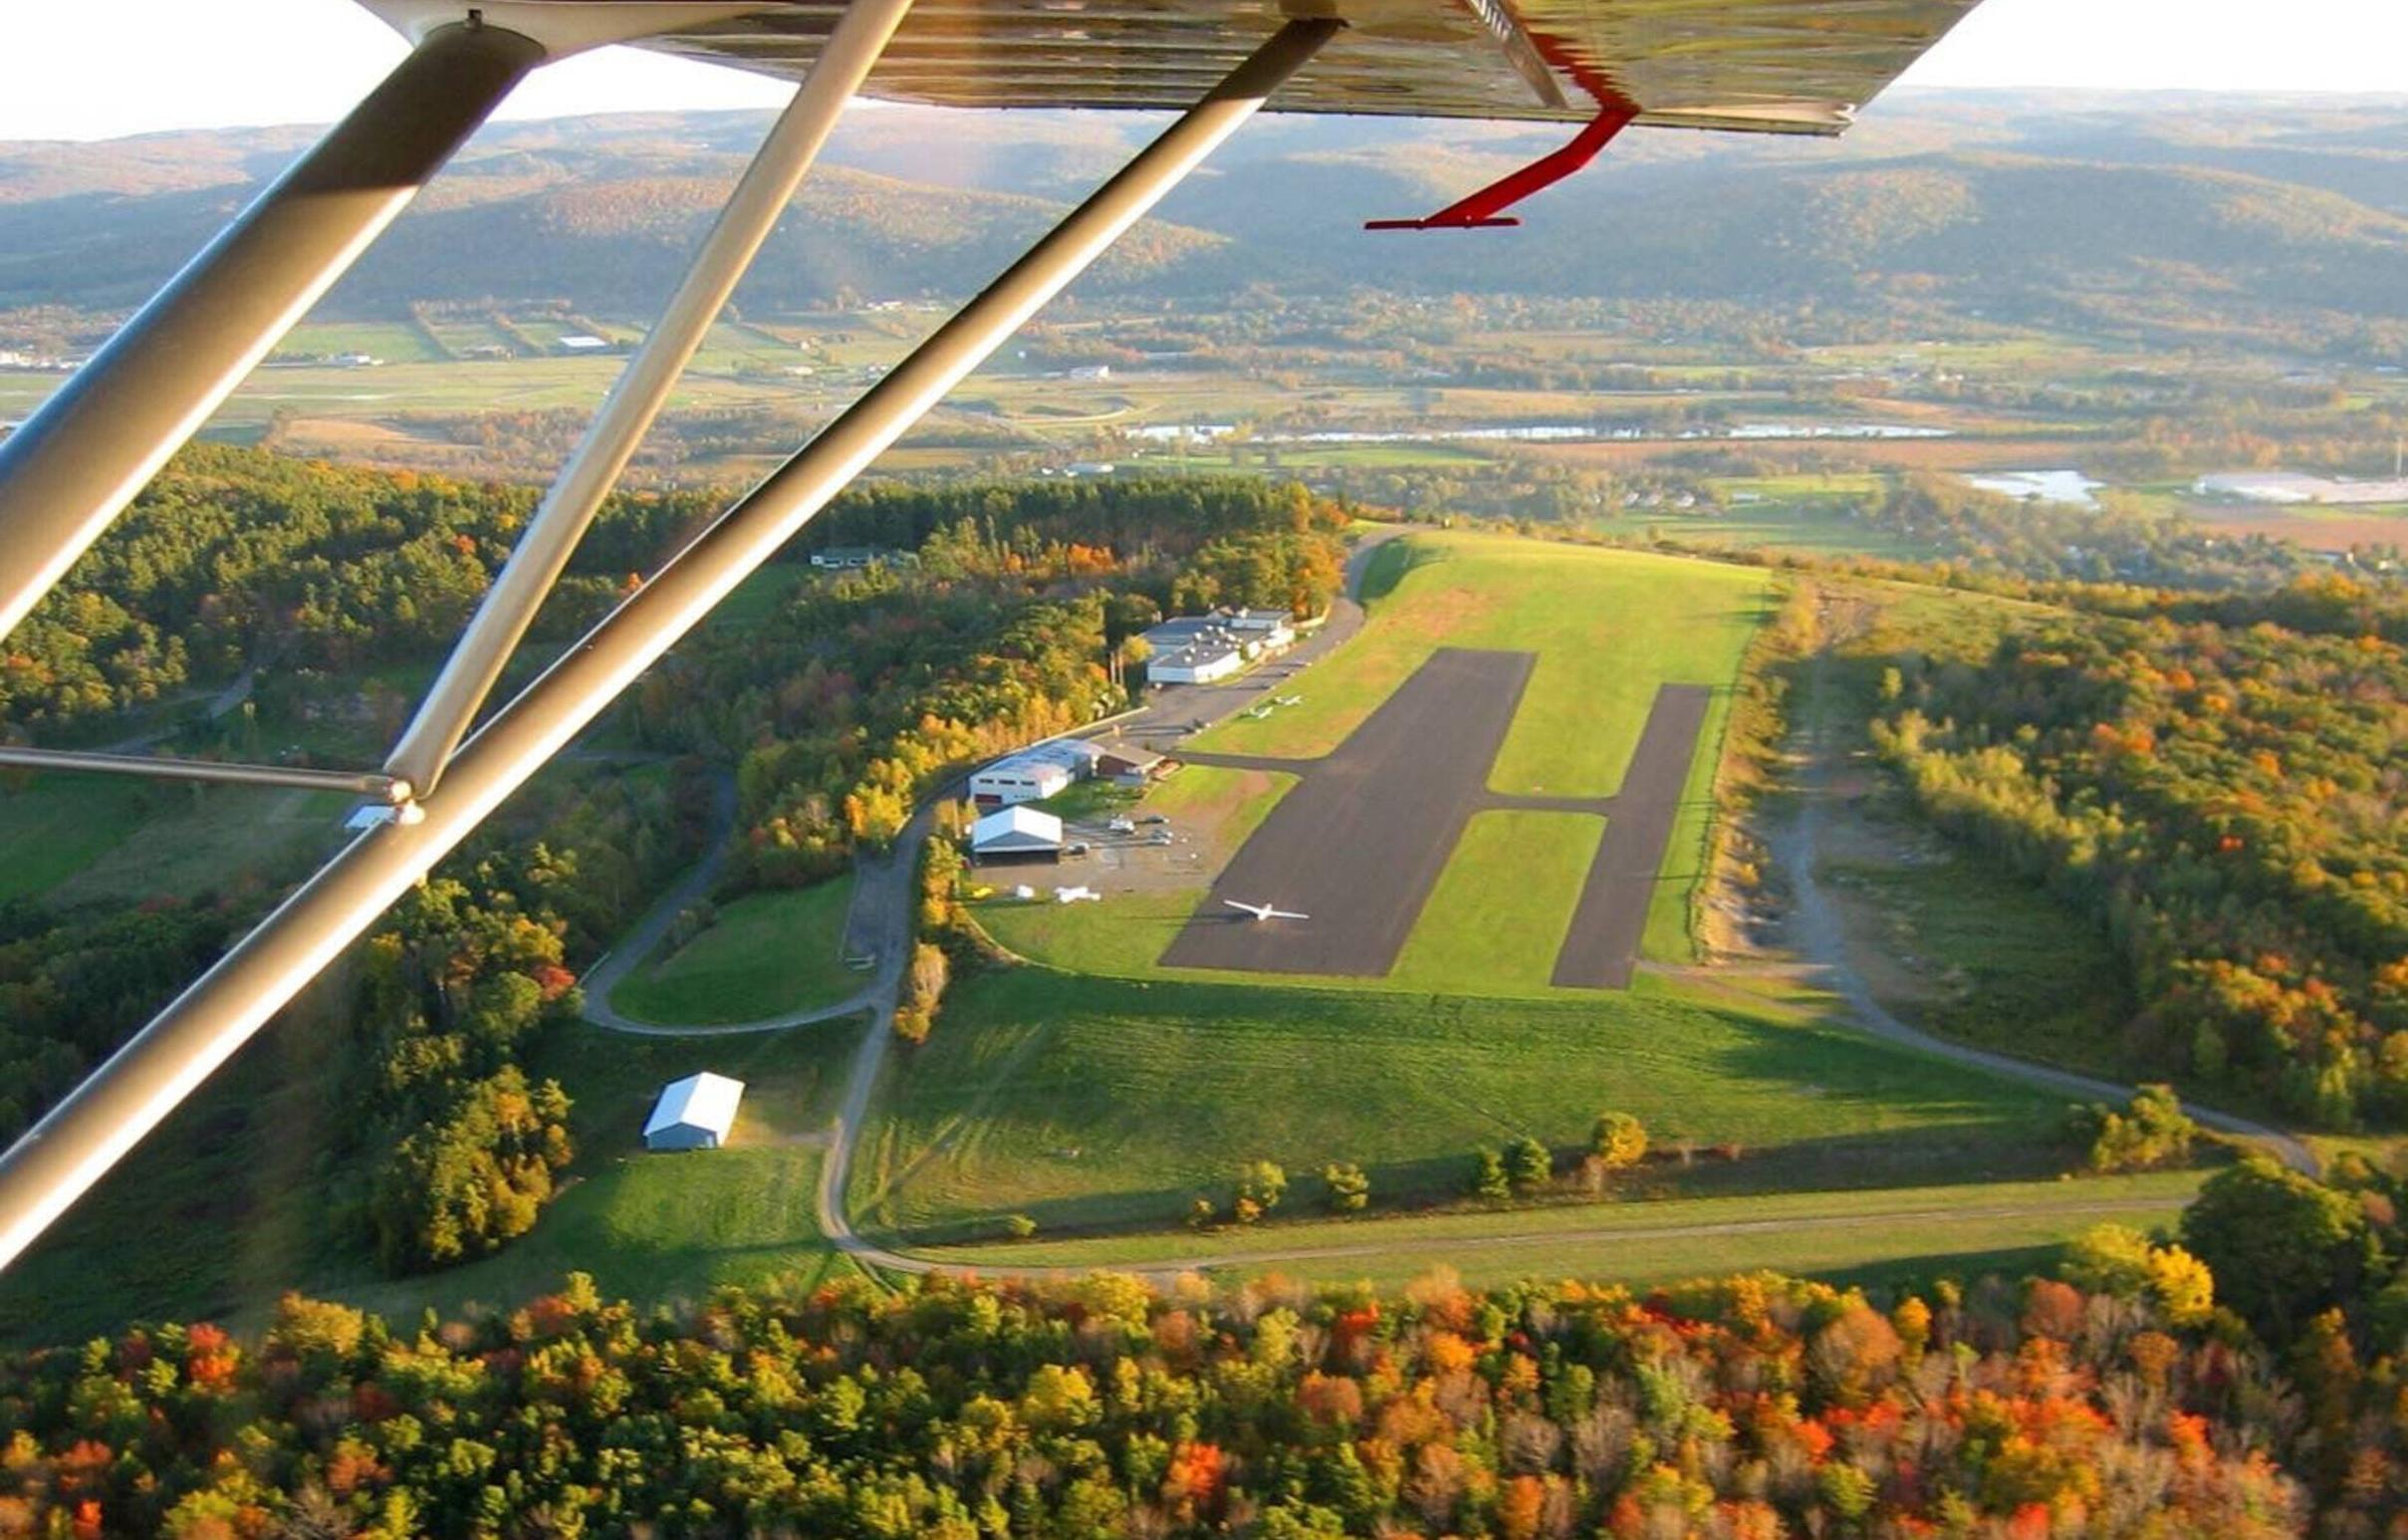 An aerial view of the National Soaring Museum